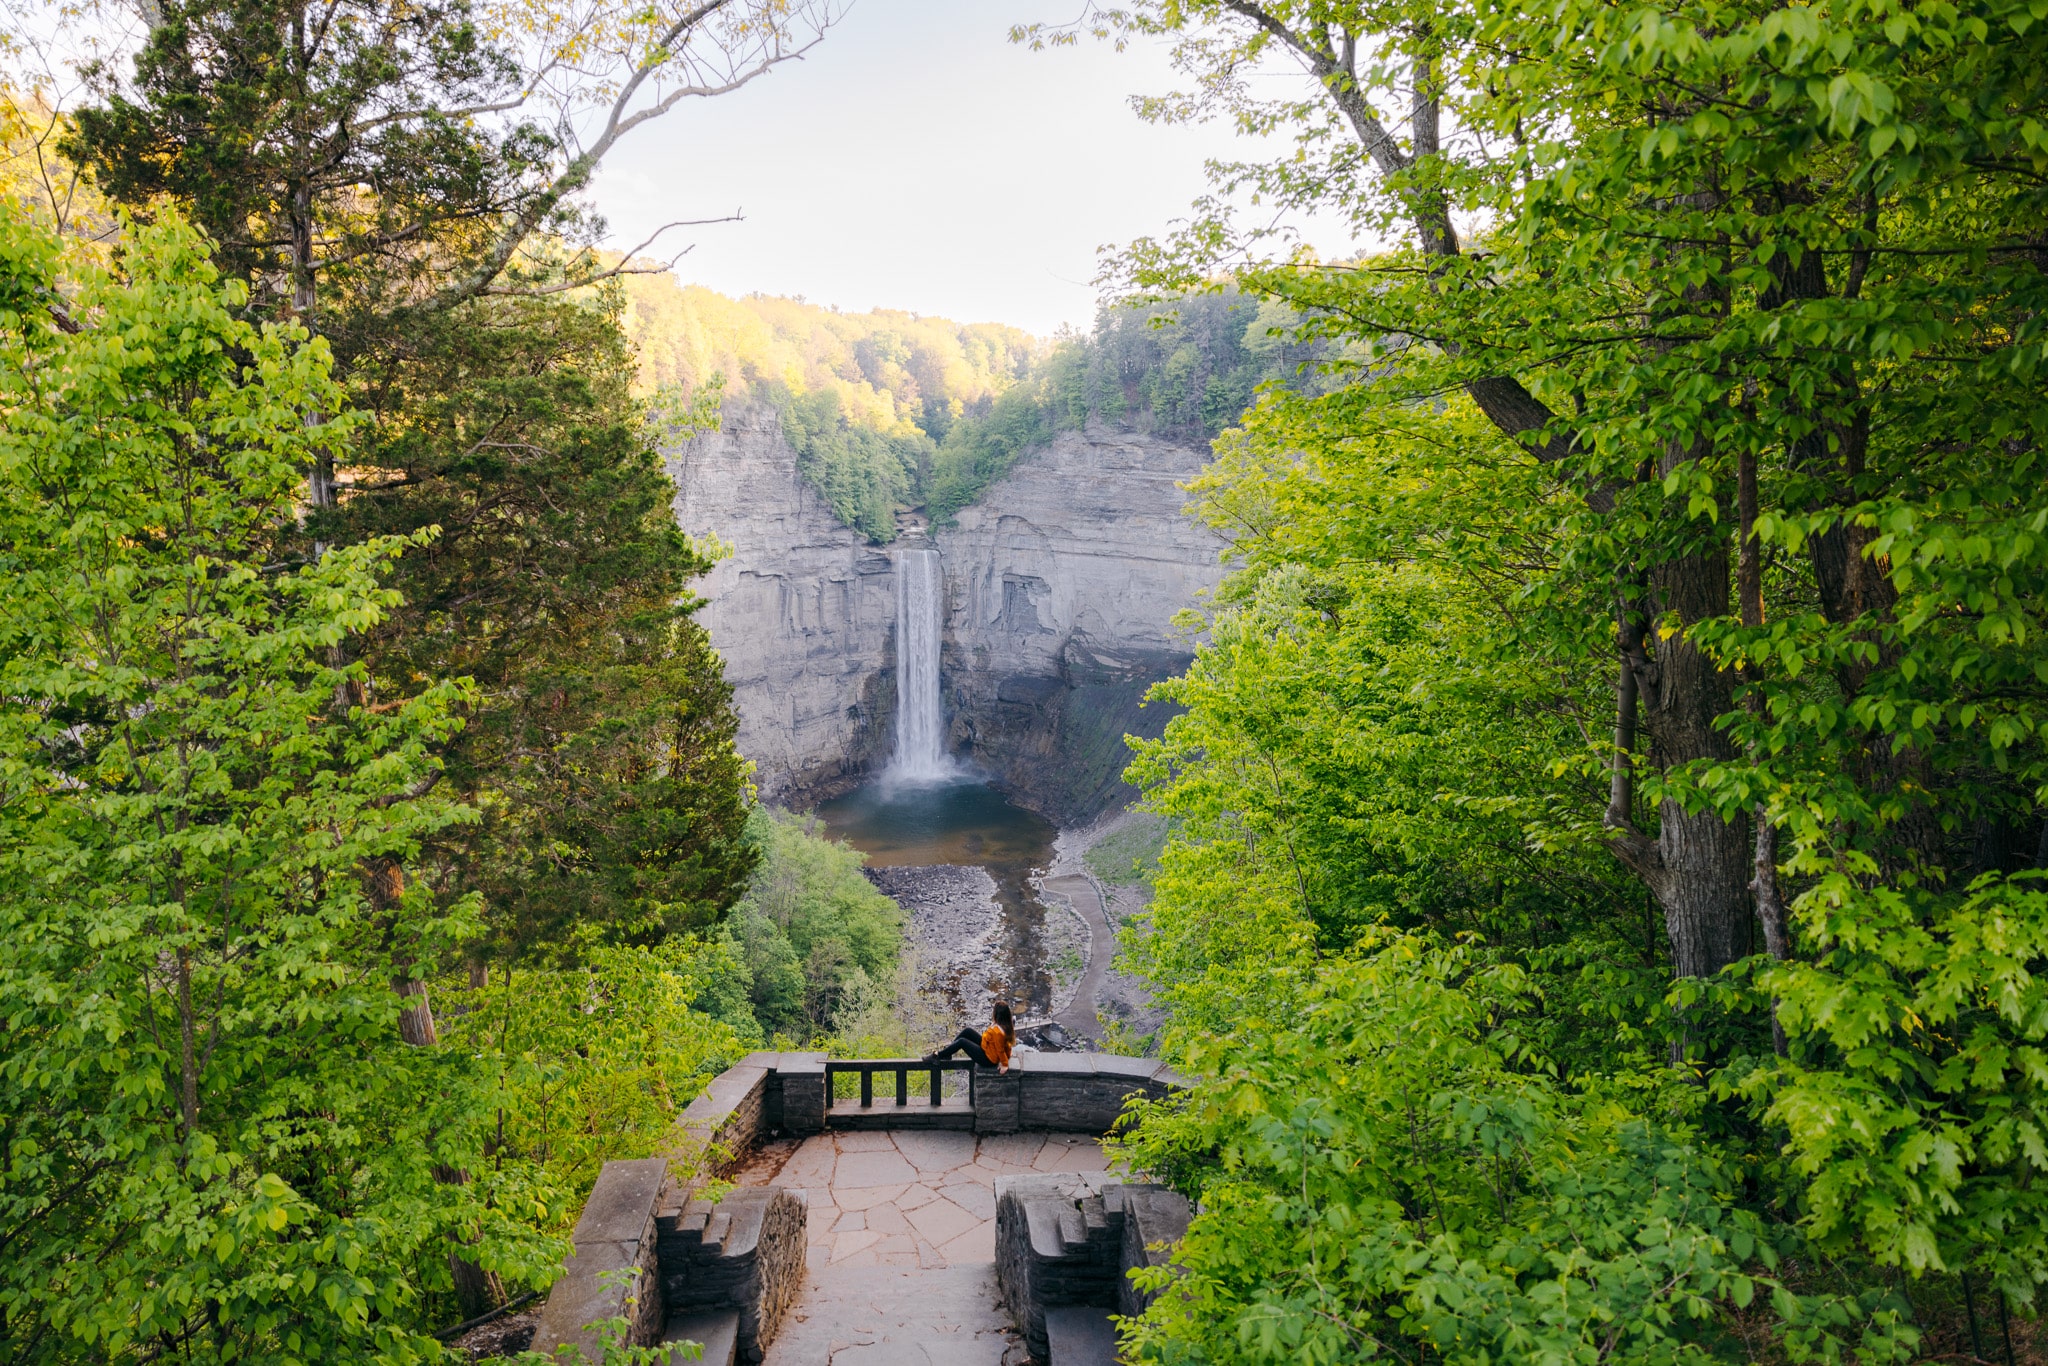 View of Taughannock Falls from the upper viewing platform